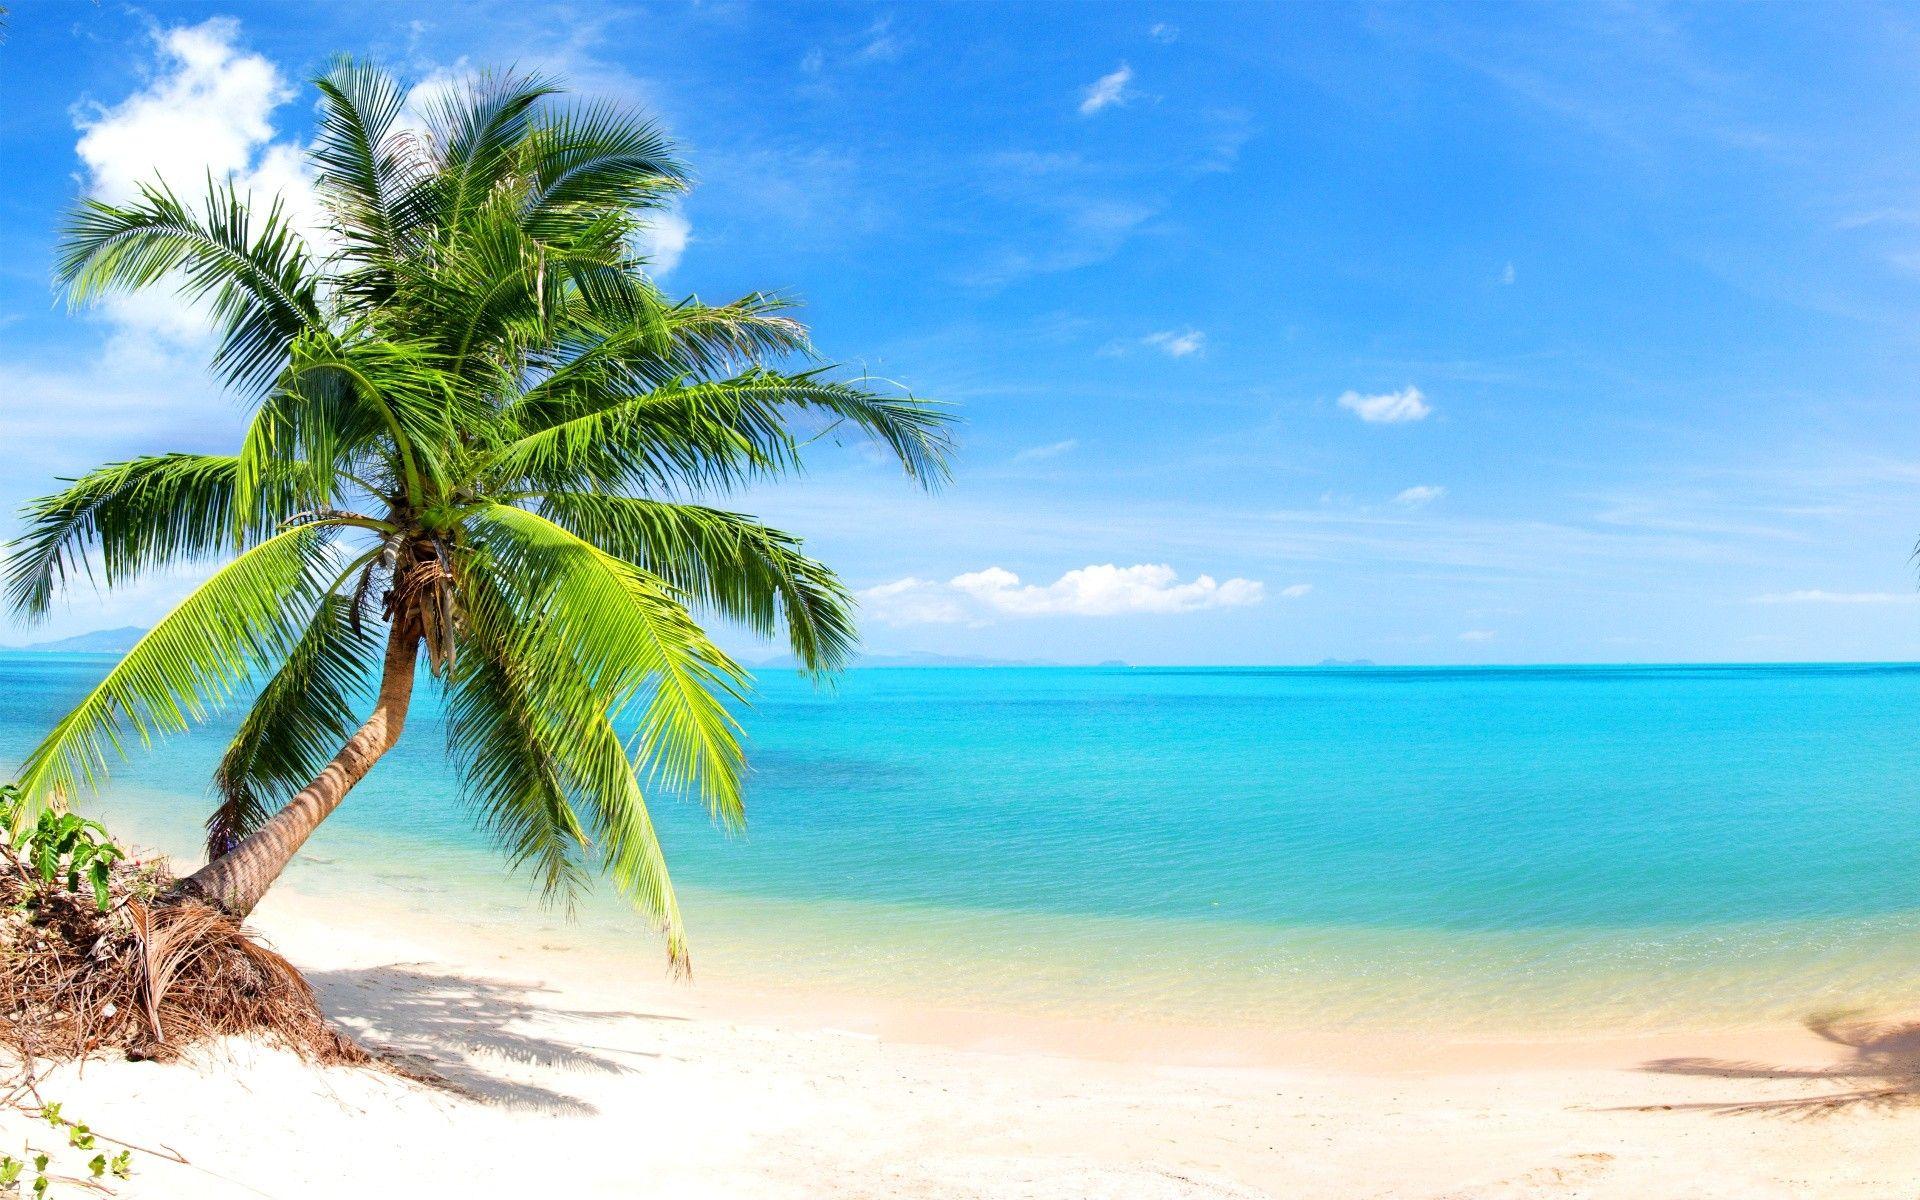 Palm Tree Beach Wallpapers - Top Free Palm Tree Beach Backgrounds